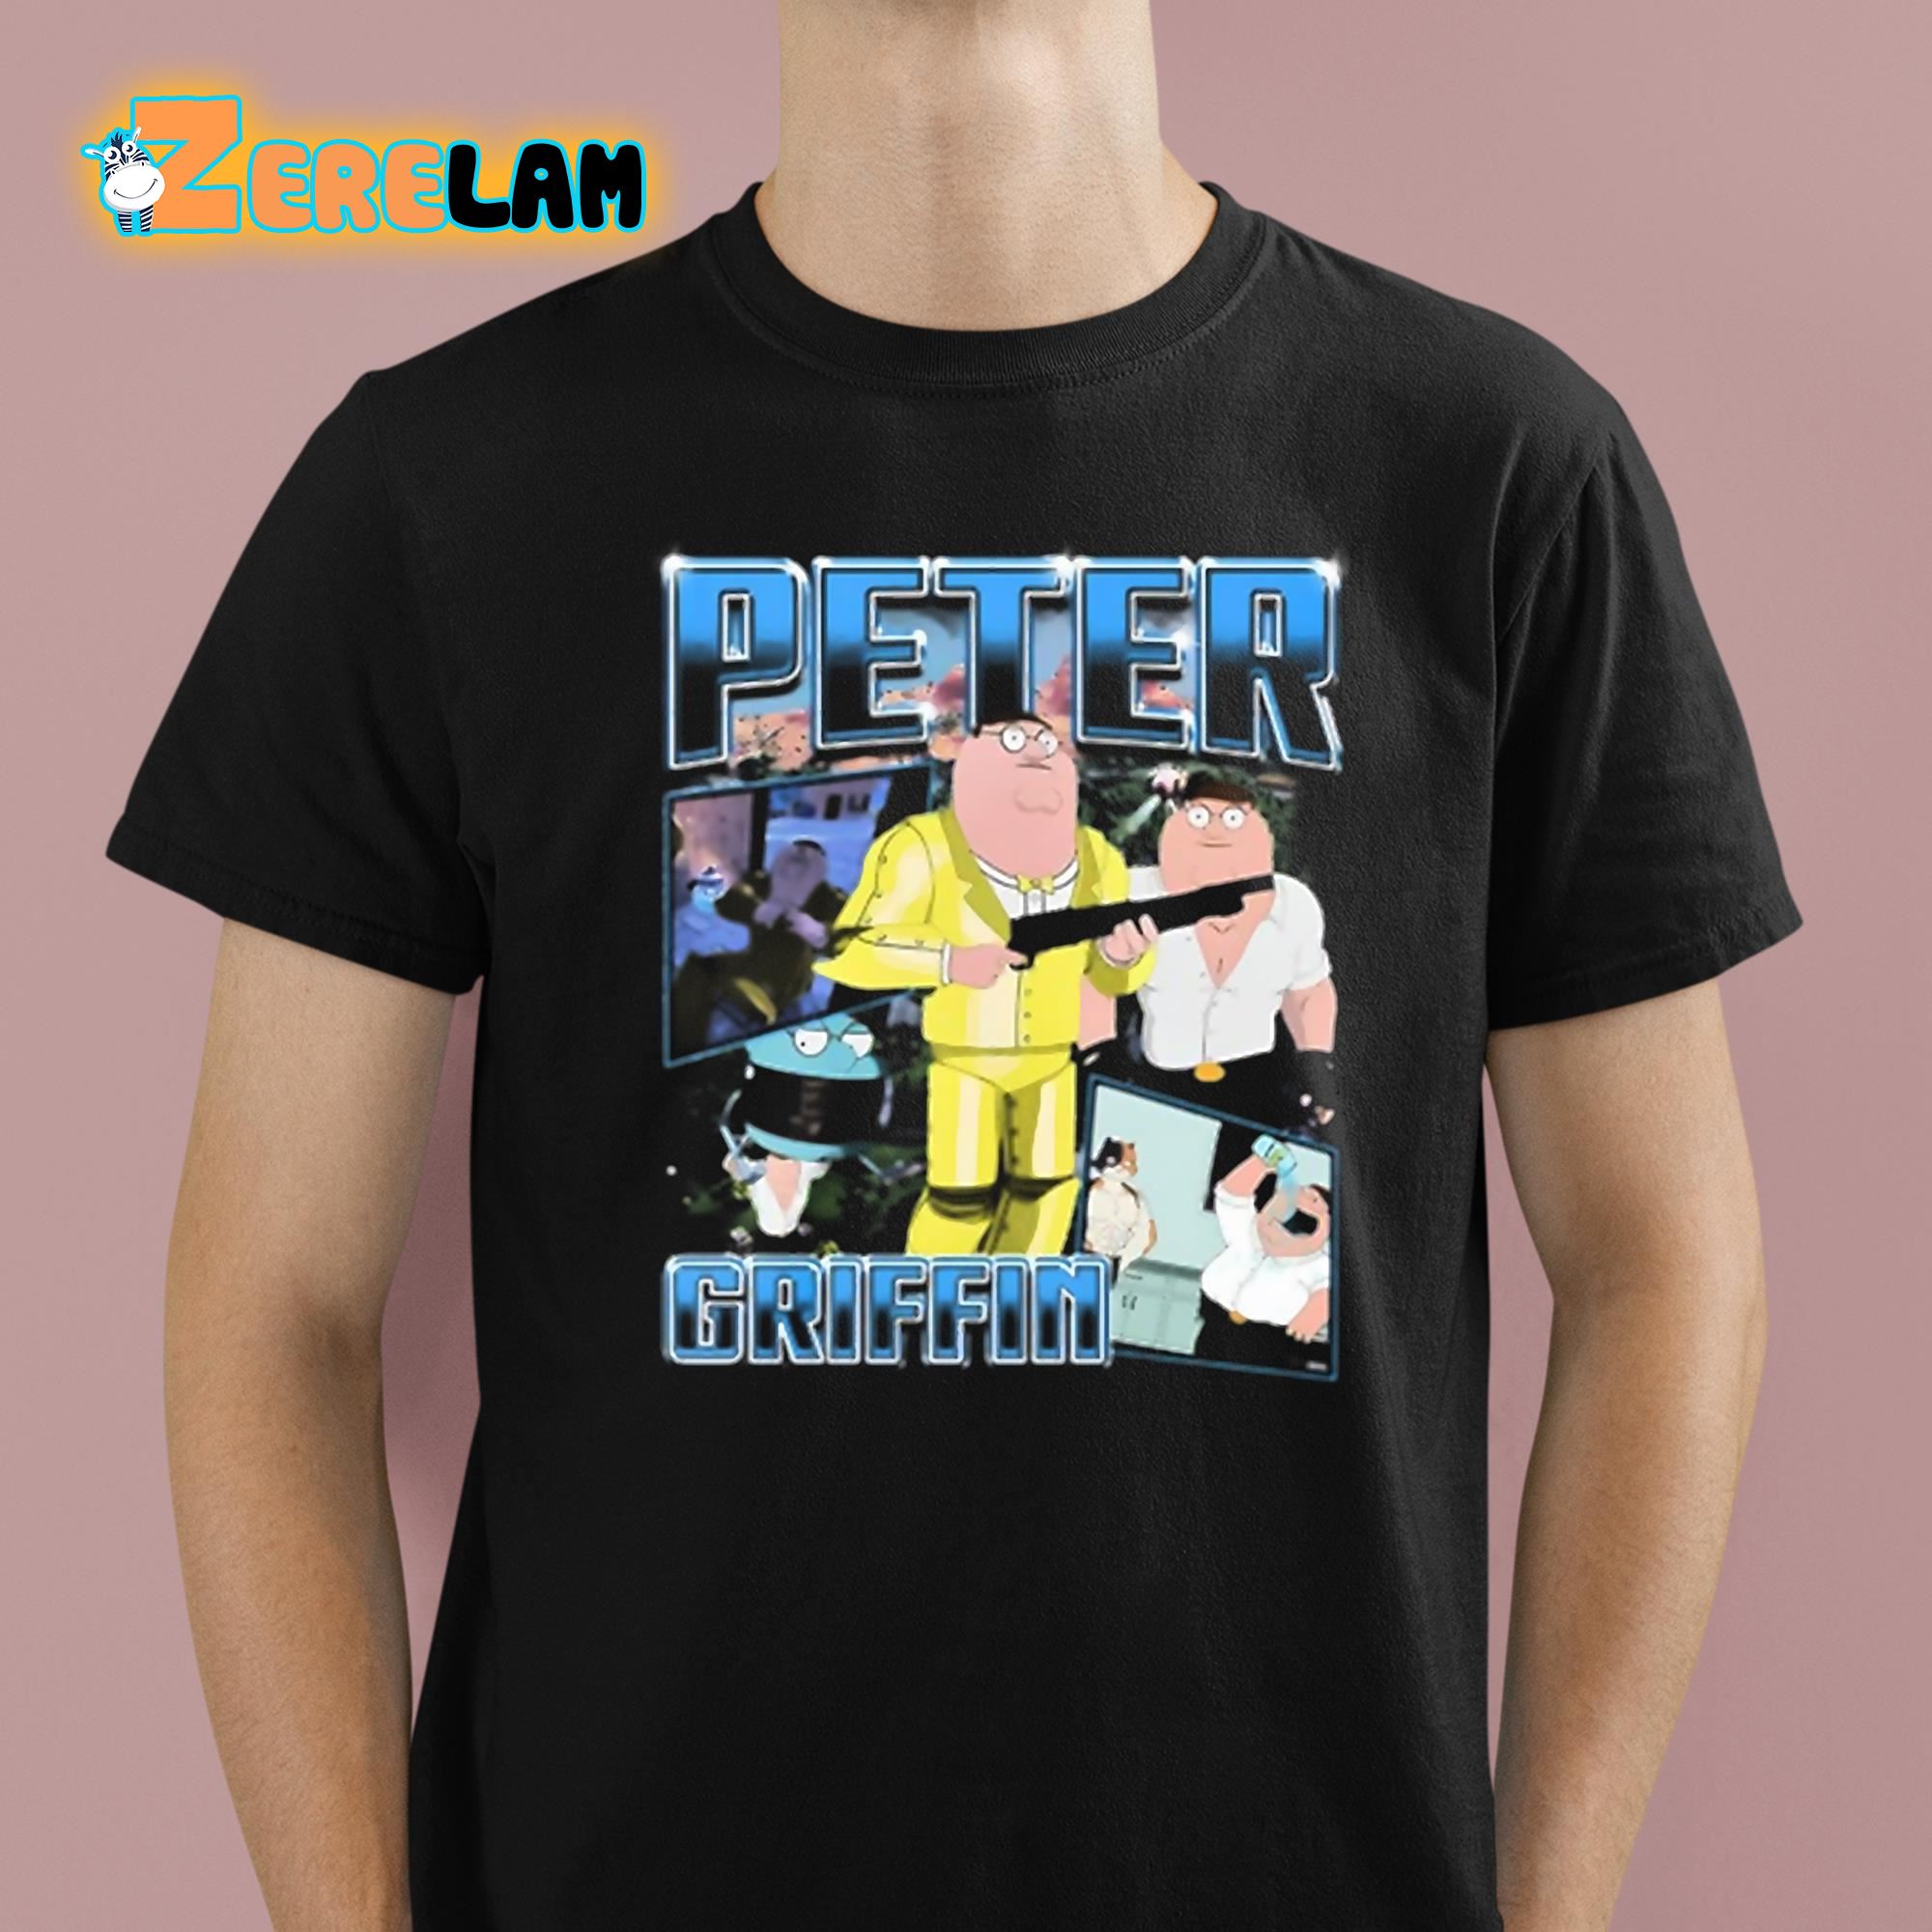 Family Guy T-Shirts. Peter Griffin Unisex T-Shirt. 100% Ultra Cotton.